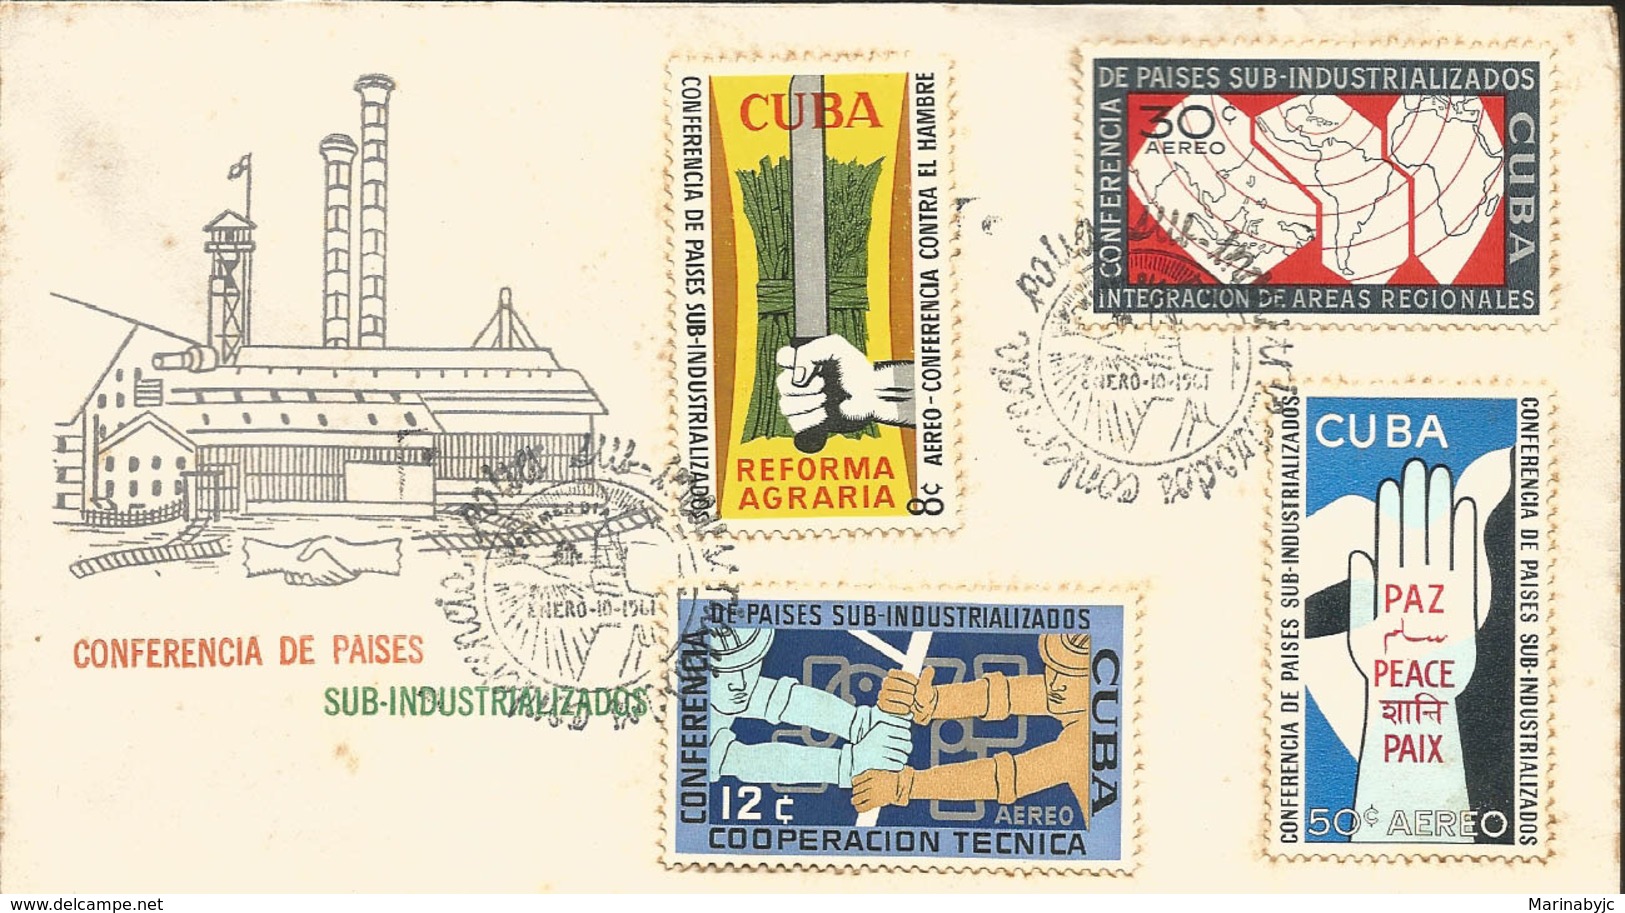 V) 1961 CARIBBEAN, PUBLIC CAPITAL FOR ECONOMIC BENEFIT, MULTIPLE STAMPS, BLACK CANCELLATION, SET OF 4, WITH SLOGAN CANCE - Lettres & Documents